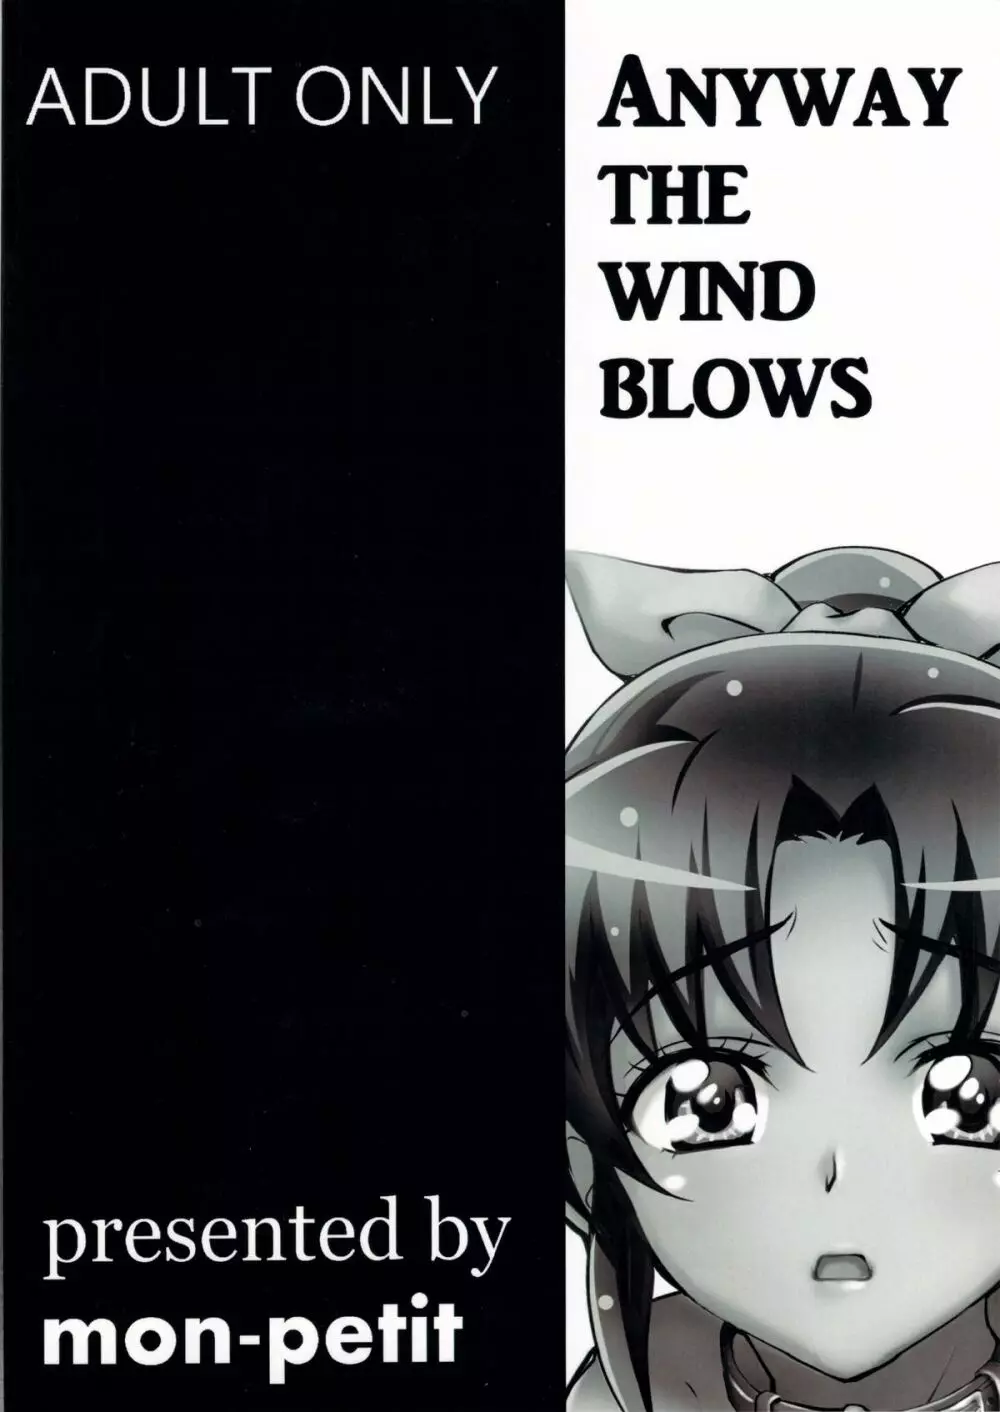 ANYWAY THE WIND BLOWS 2ページ